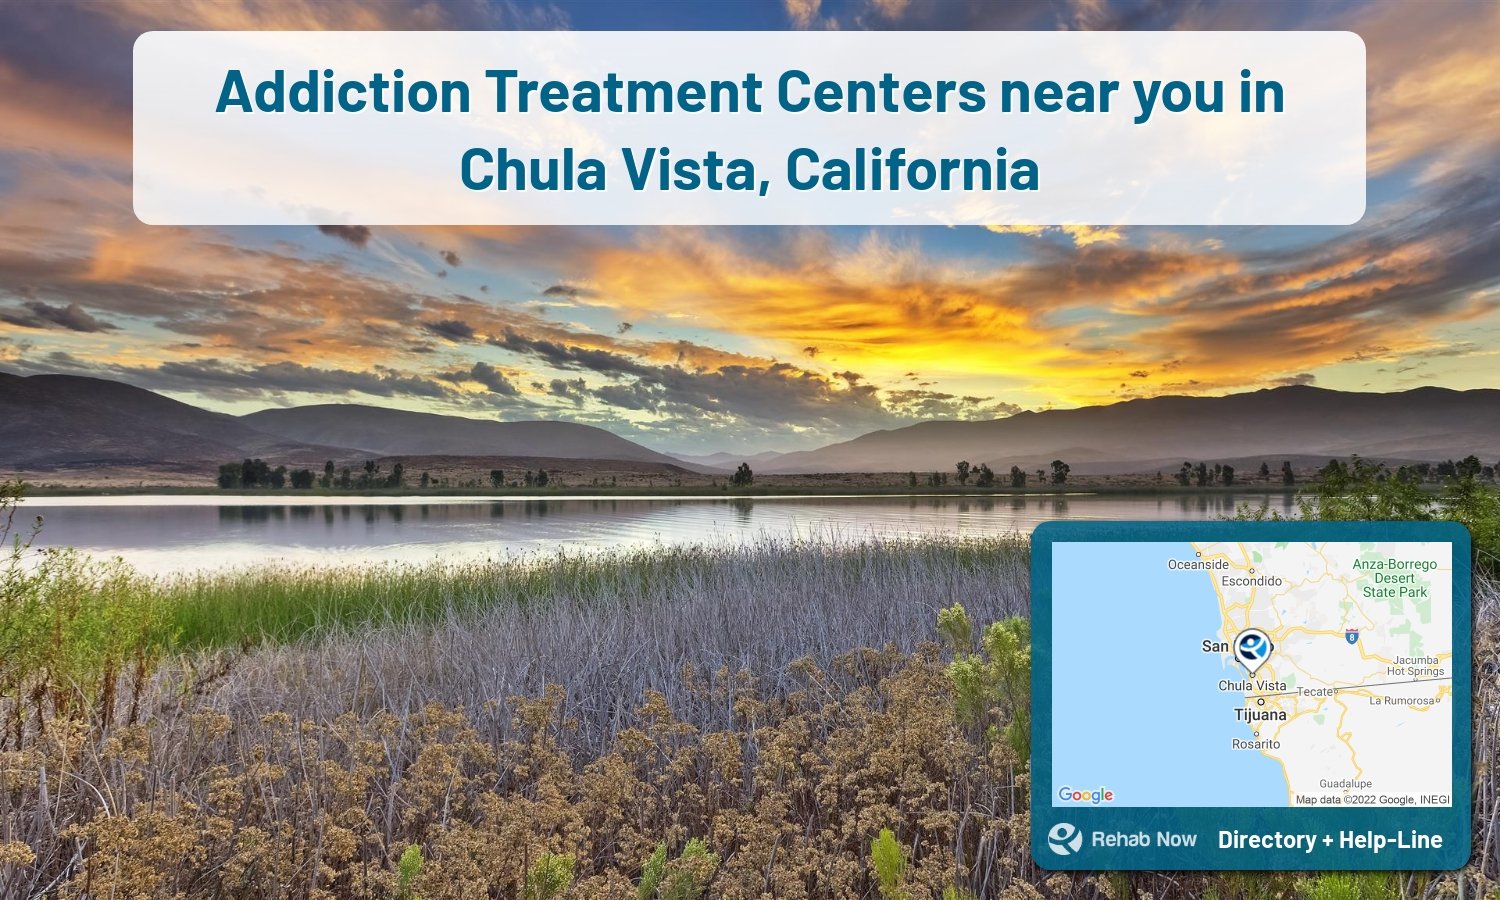 Our experts can help you find treatment now in Chula Vista, California. We list drug rehab and alcohol centers in California.